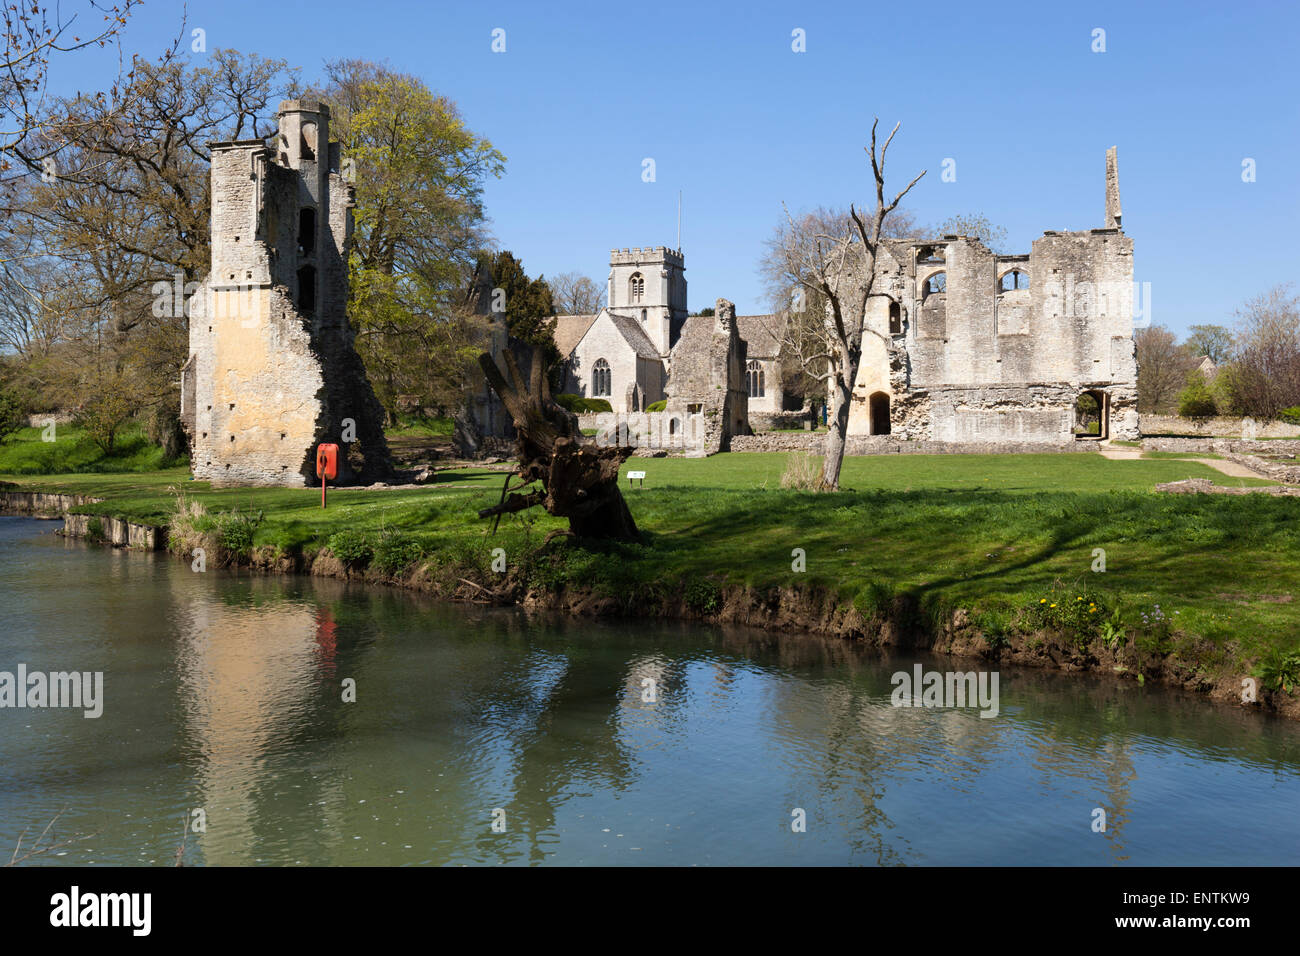 Rovine di Minster Lovell Hall sul Fiume Windrush, Minster Lovell, vicino a Witney, Cotswolds, Oxfordshire, England, Regno Unito Foto Stock